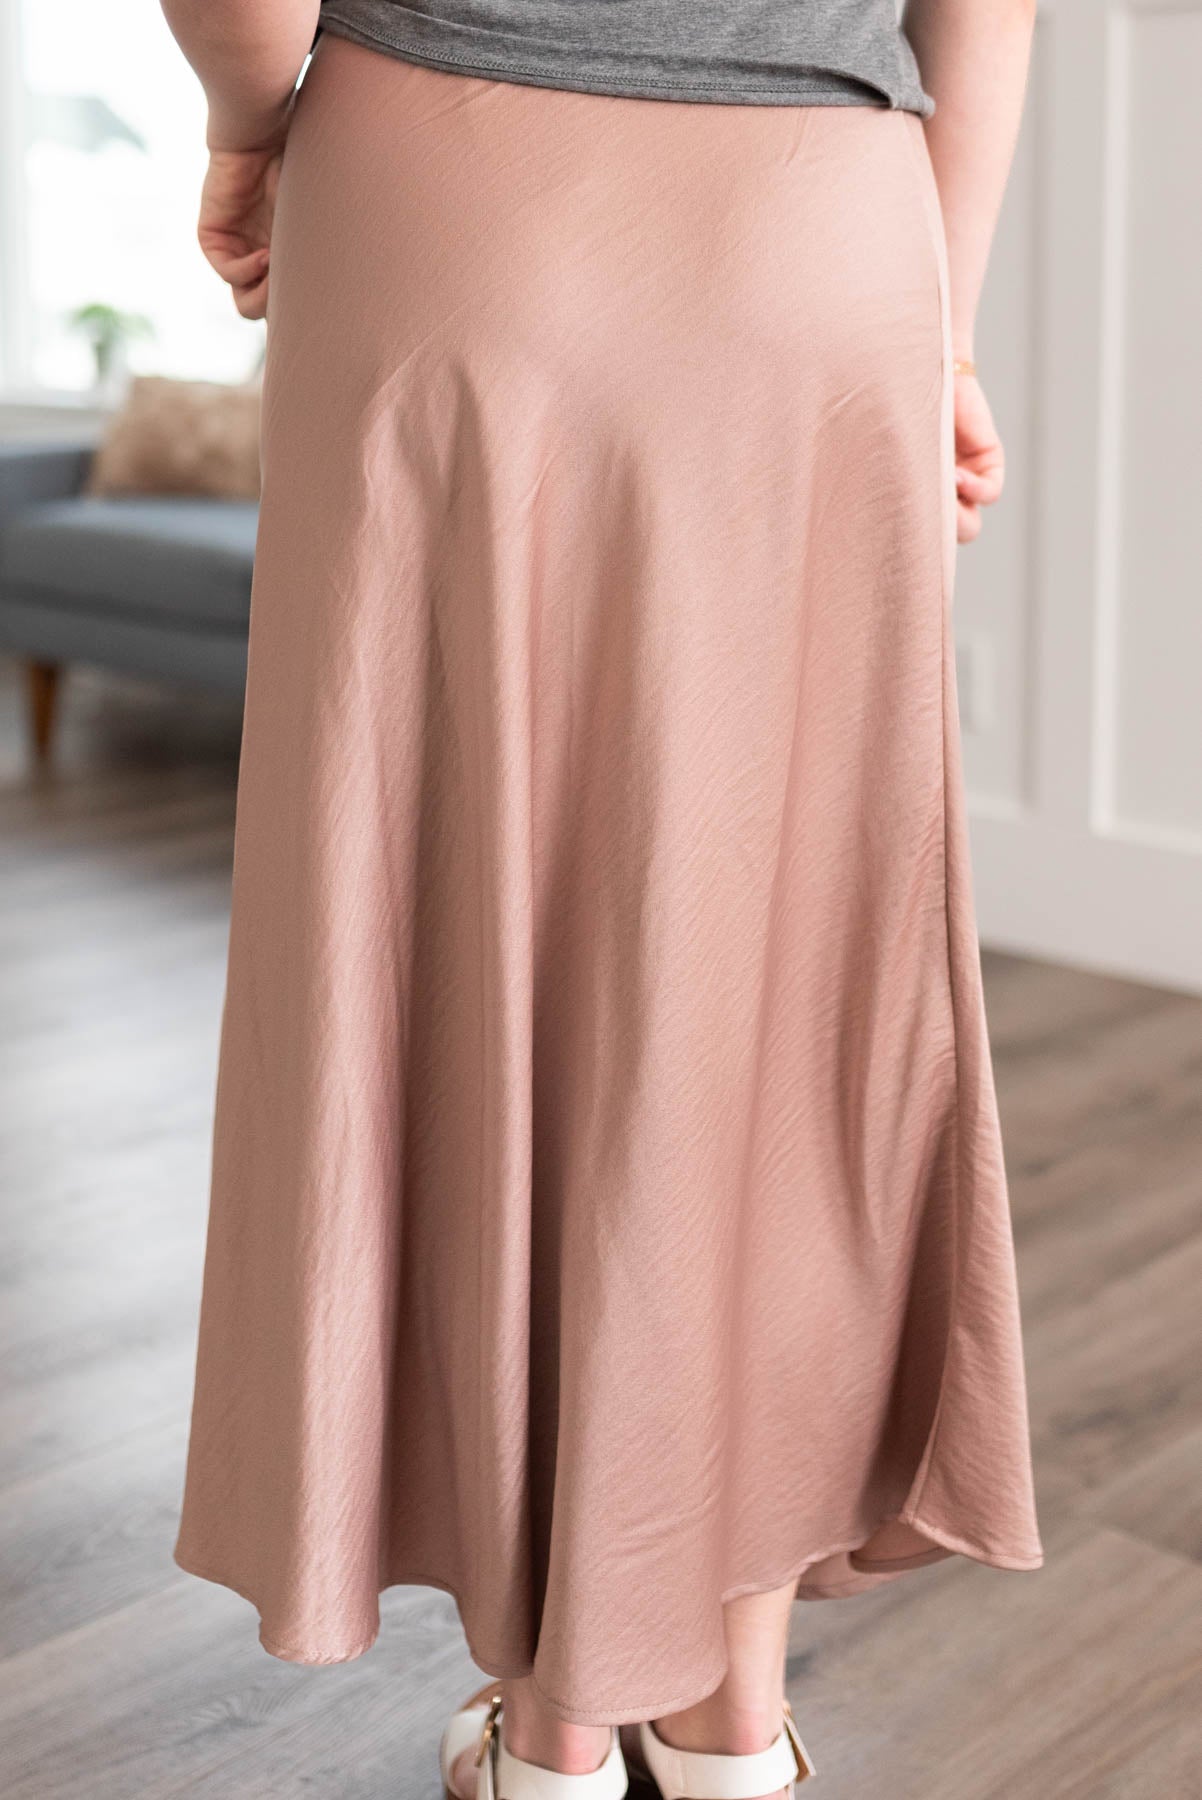 Back view of a taupe skirt